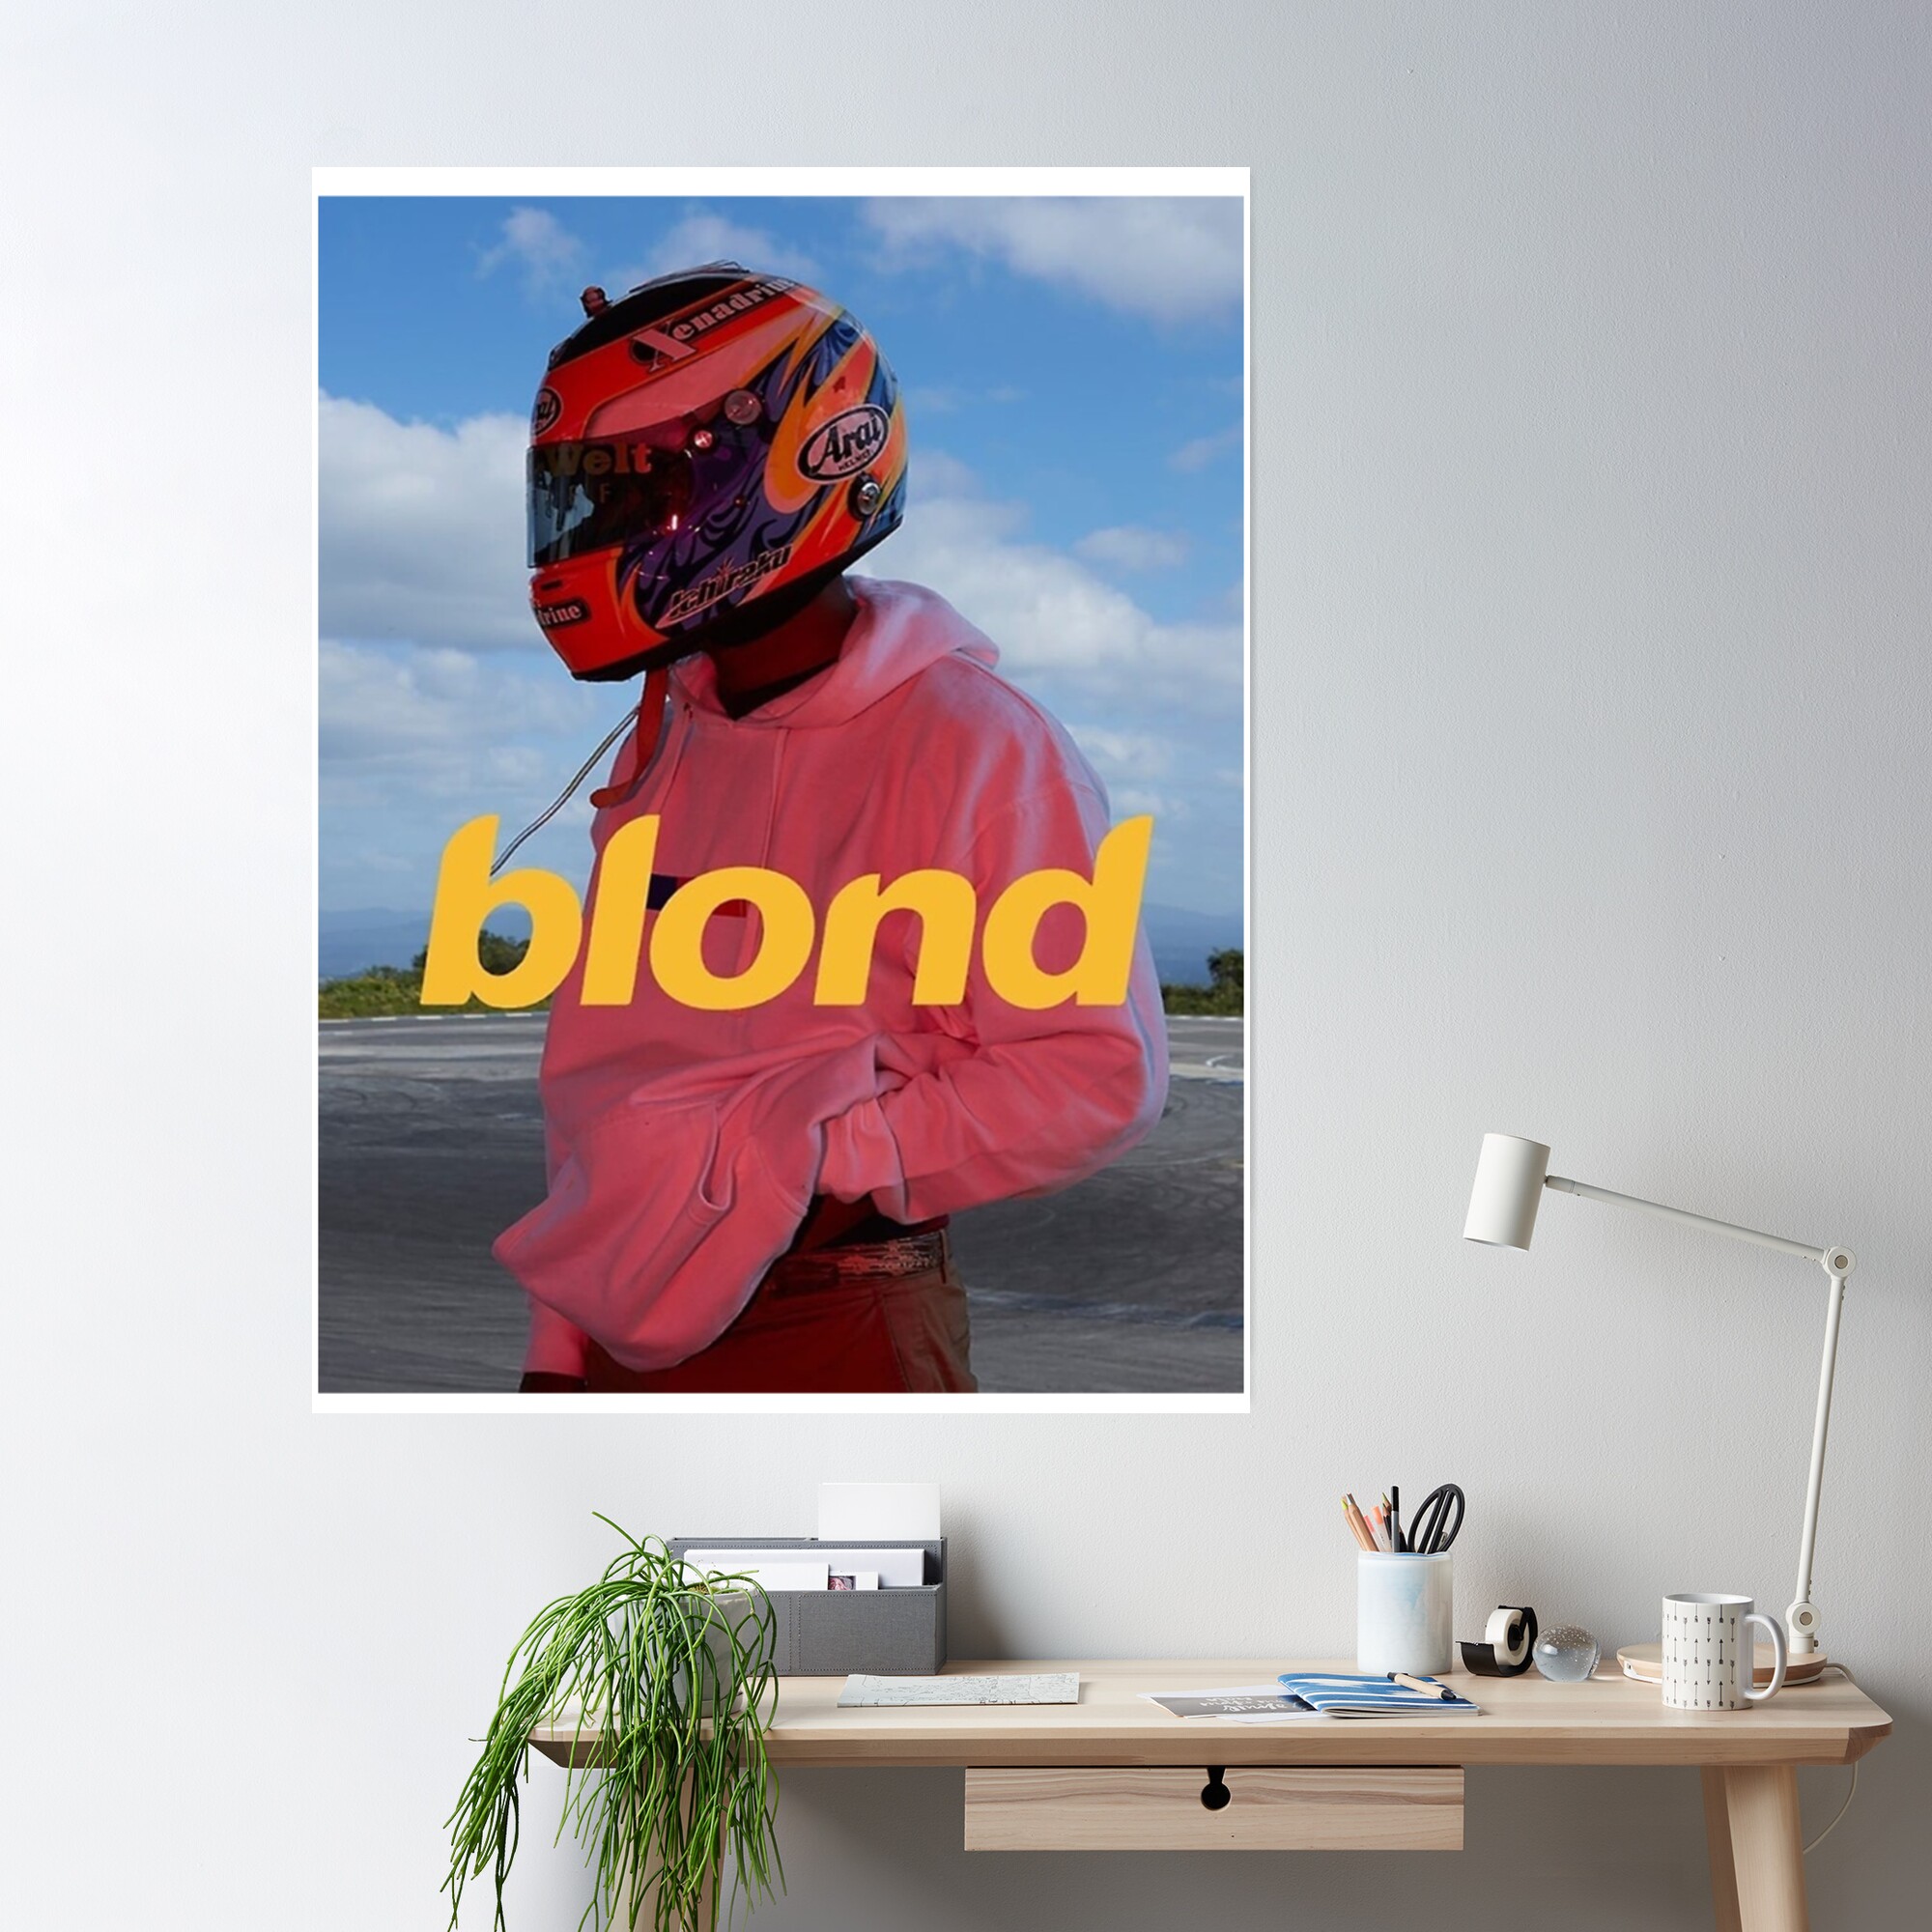 cposterlargesquare product2000x2000 11 1 - Frank Ocean Merch